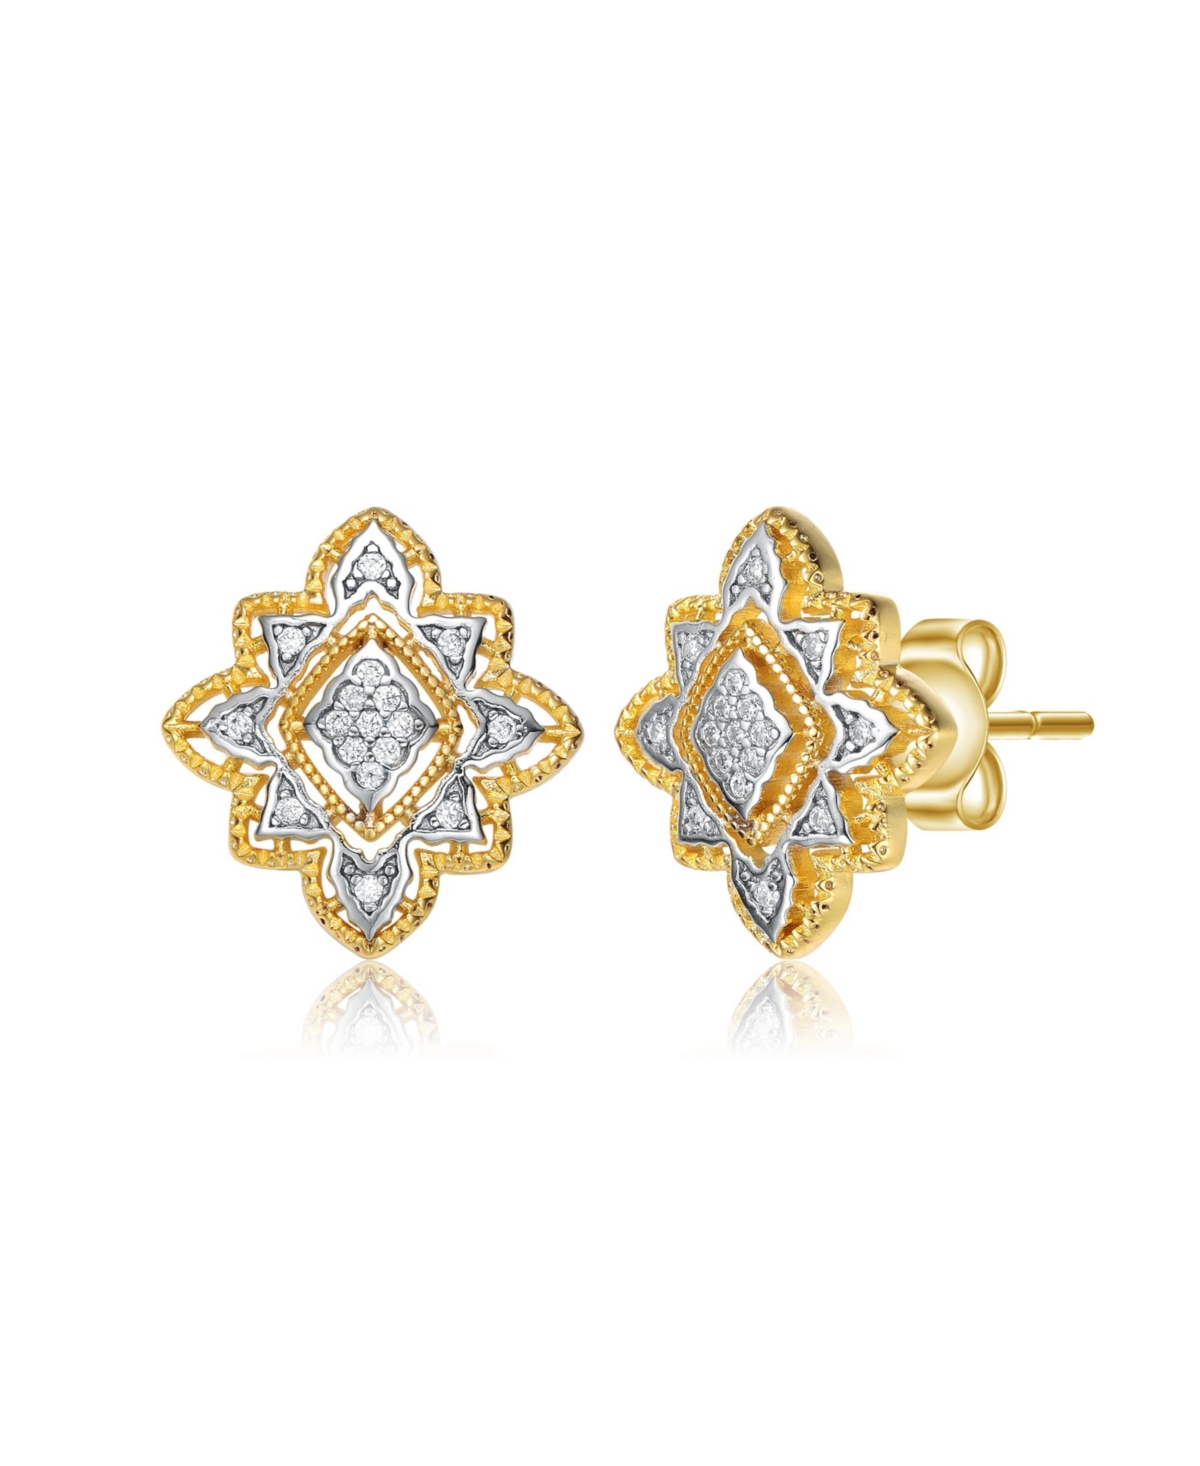 RACHEL GLAUBER 4 PRONG 14K GOLD PLATED AND CUBIC ZIRCONIA FLORAL STUD EARRINGS